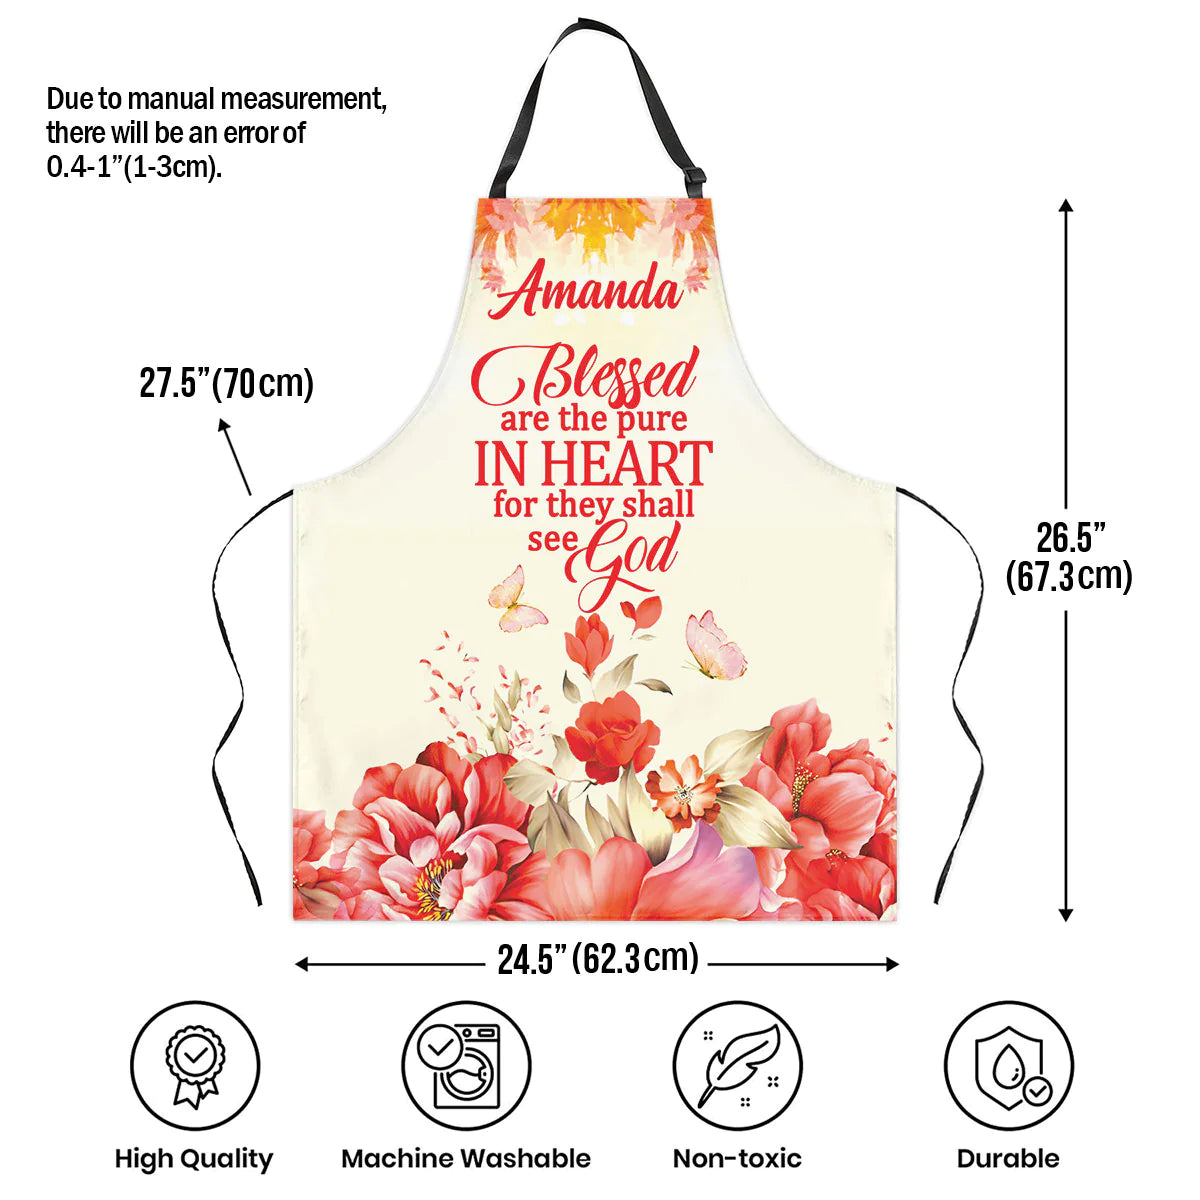 Christianartbag Apron, Blessed Are The Pure In Heart Flower And Butterfly Matthew 5:8, Apron for Women, Gift For Women, Christmas Gift, - Christian Art Bag